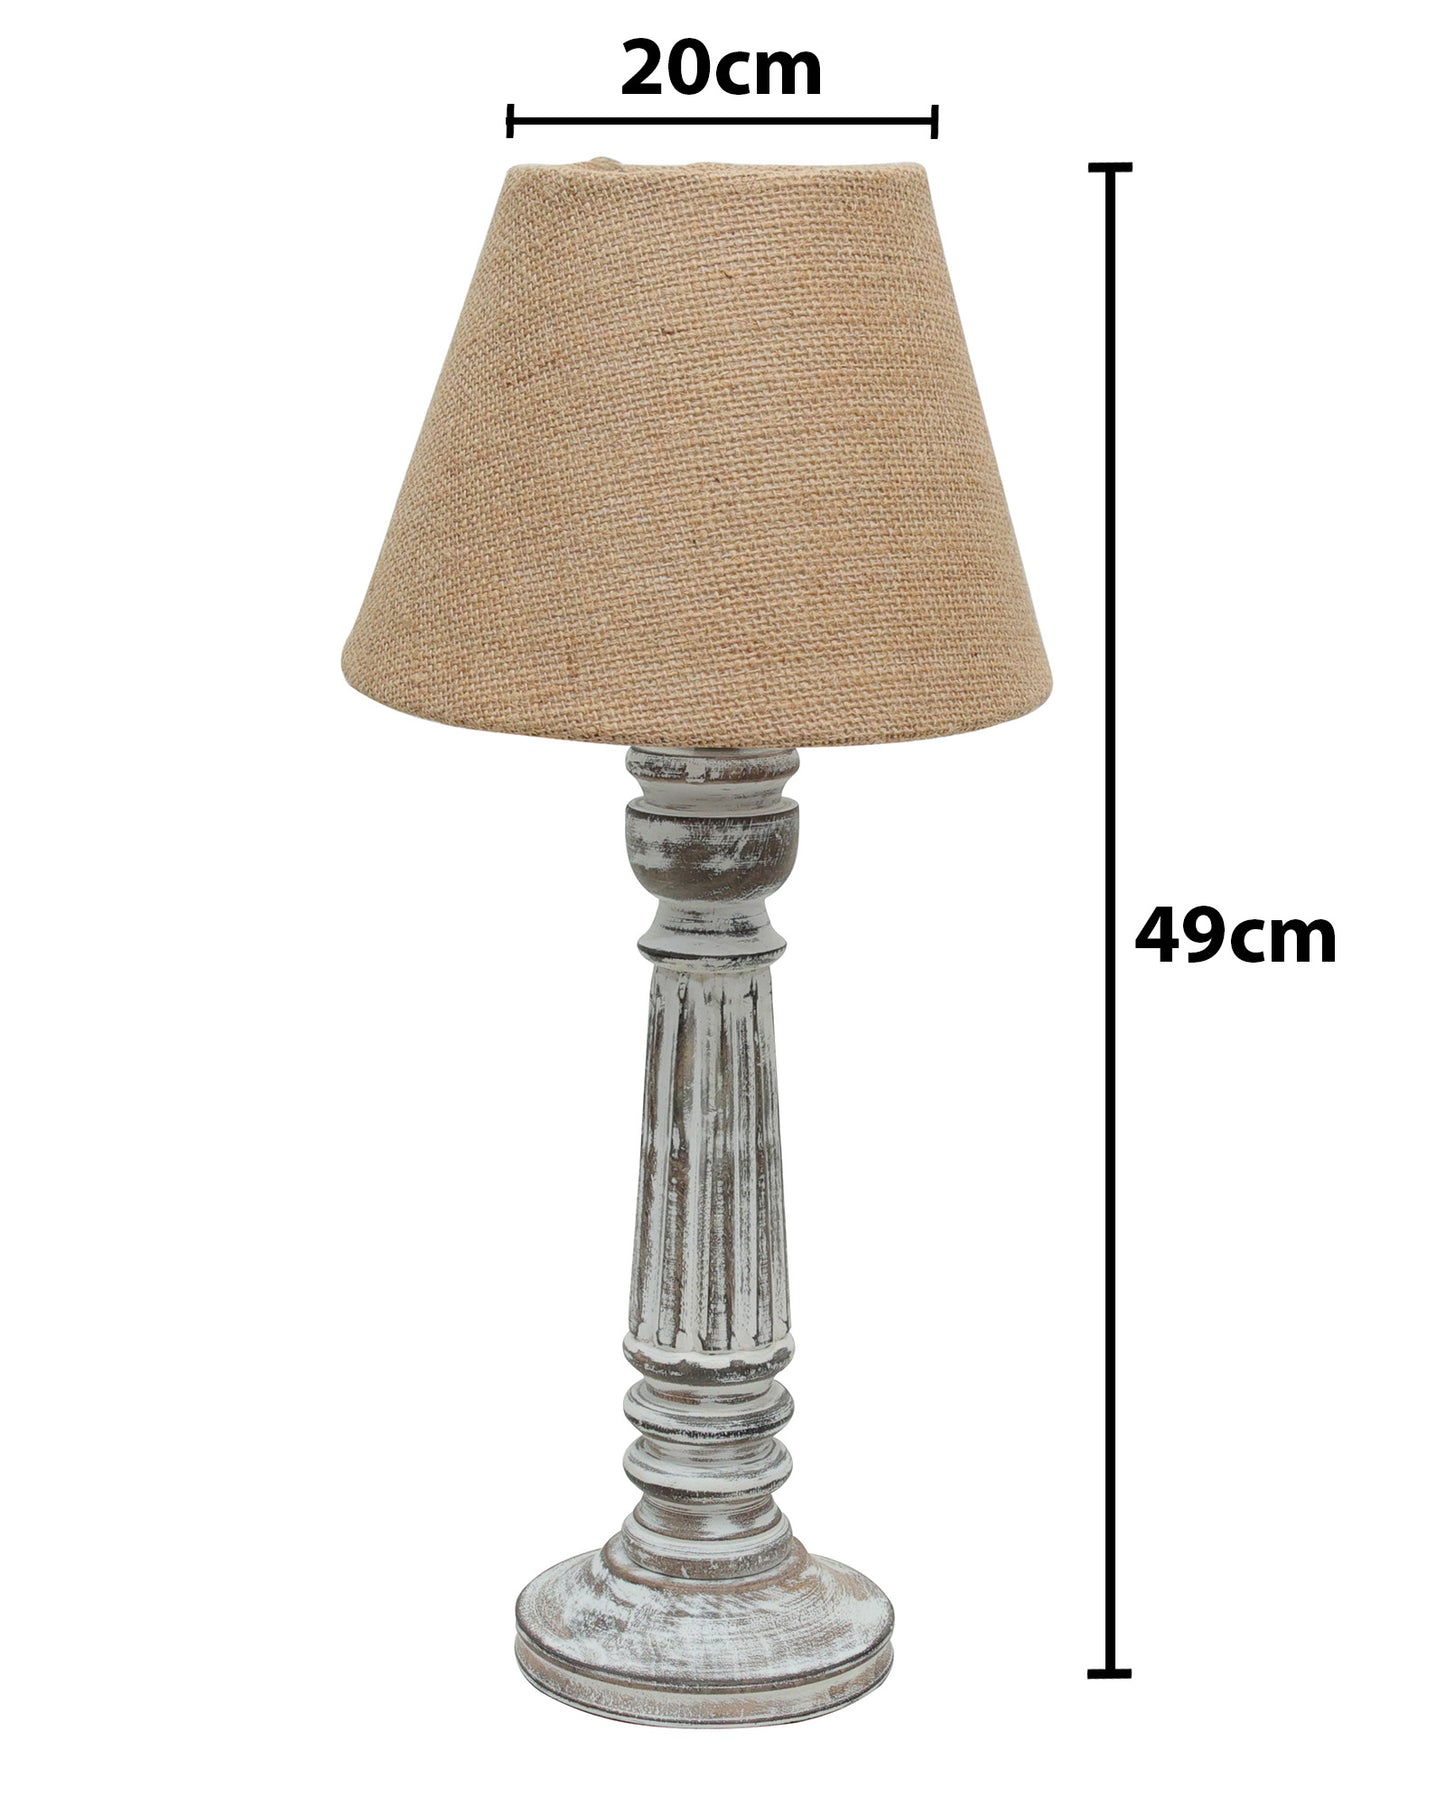 Traditional Country Cottage Table Lamp Antique White Athens Desk Lamp for Bedroom Living Room